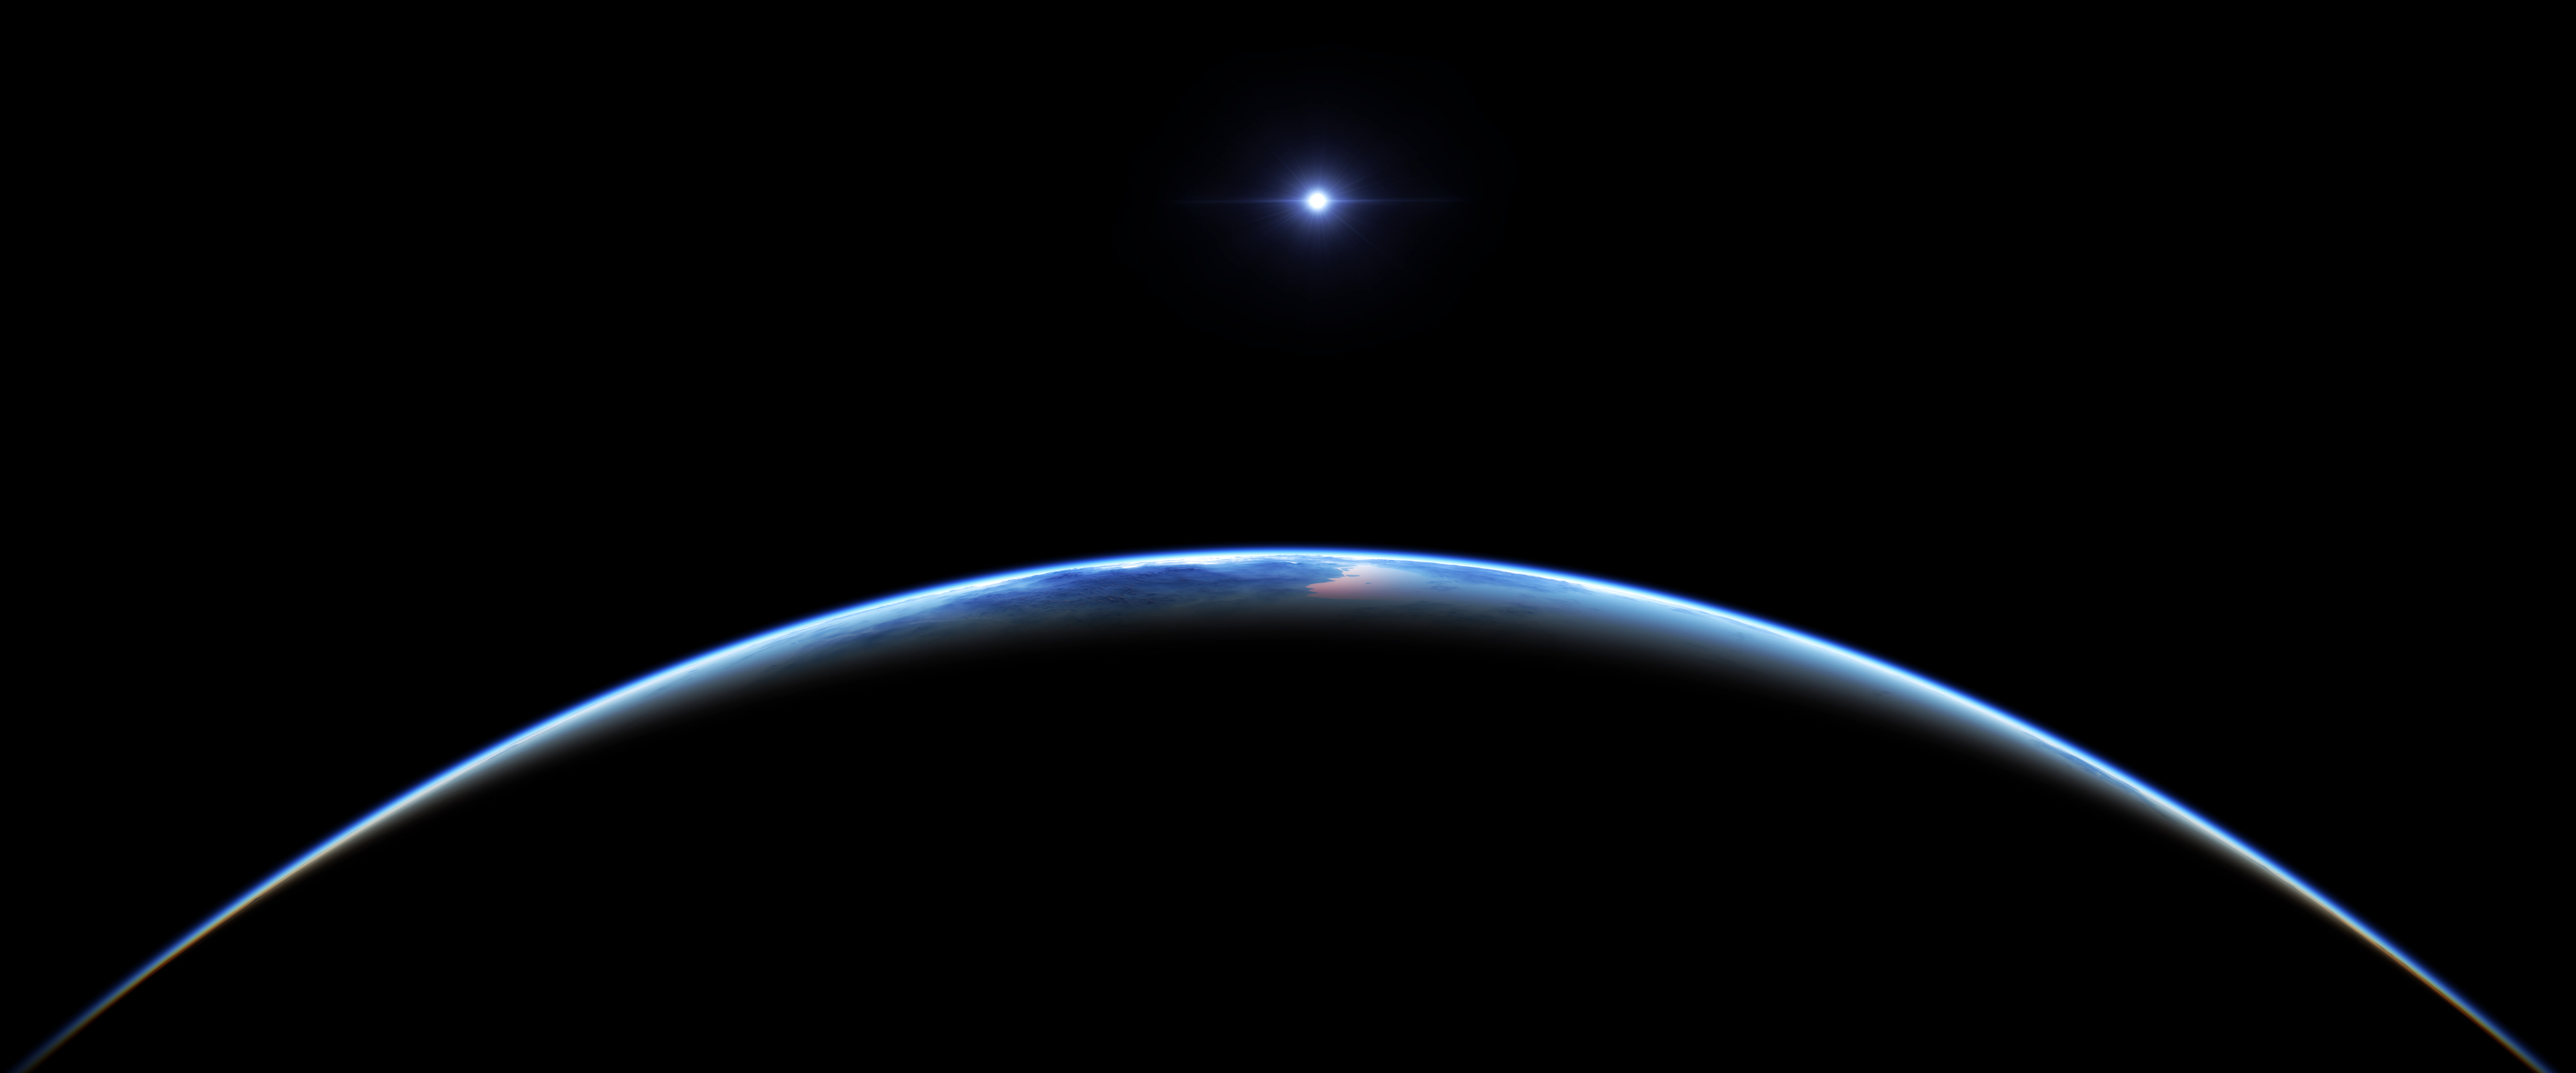 Space Engine, planet - space, planet earth, astronomy, sky, black background